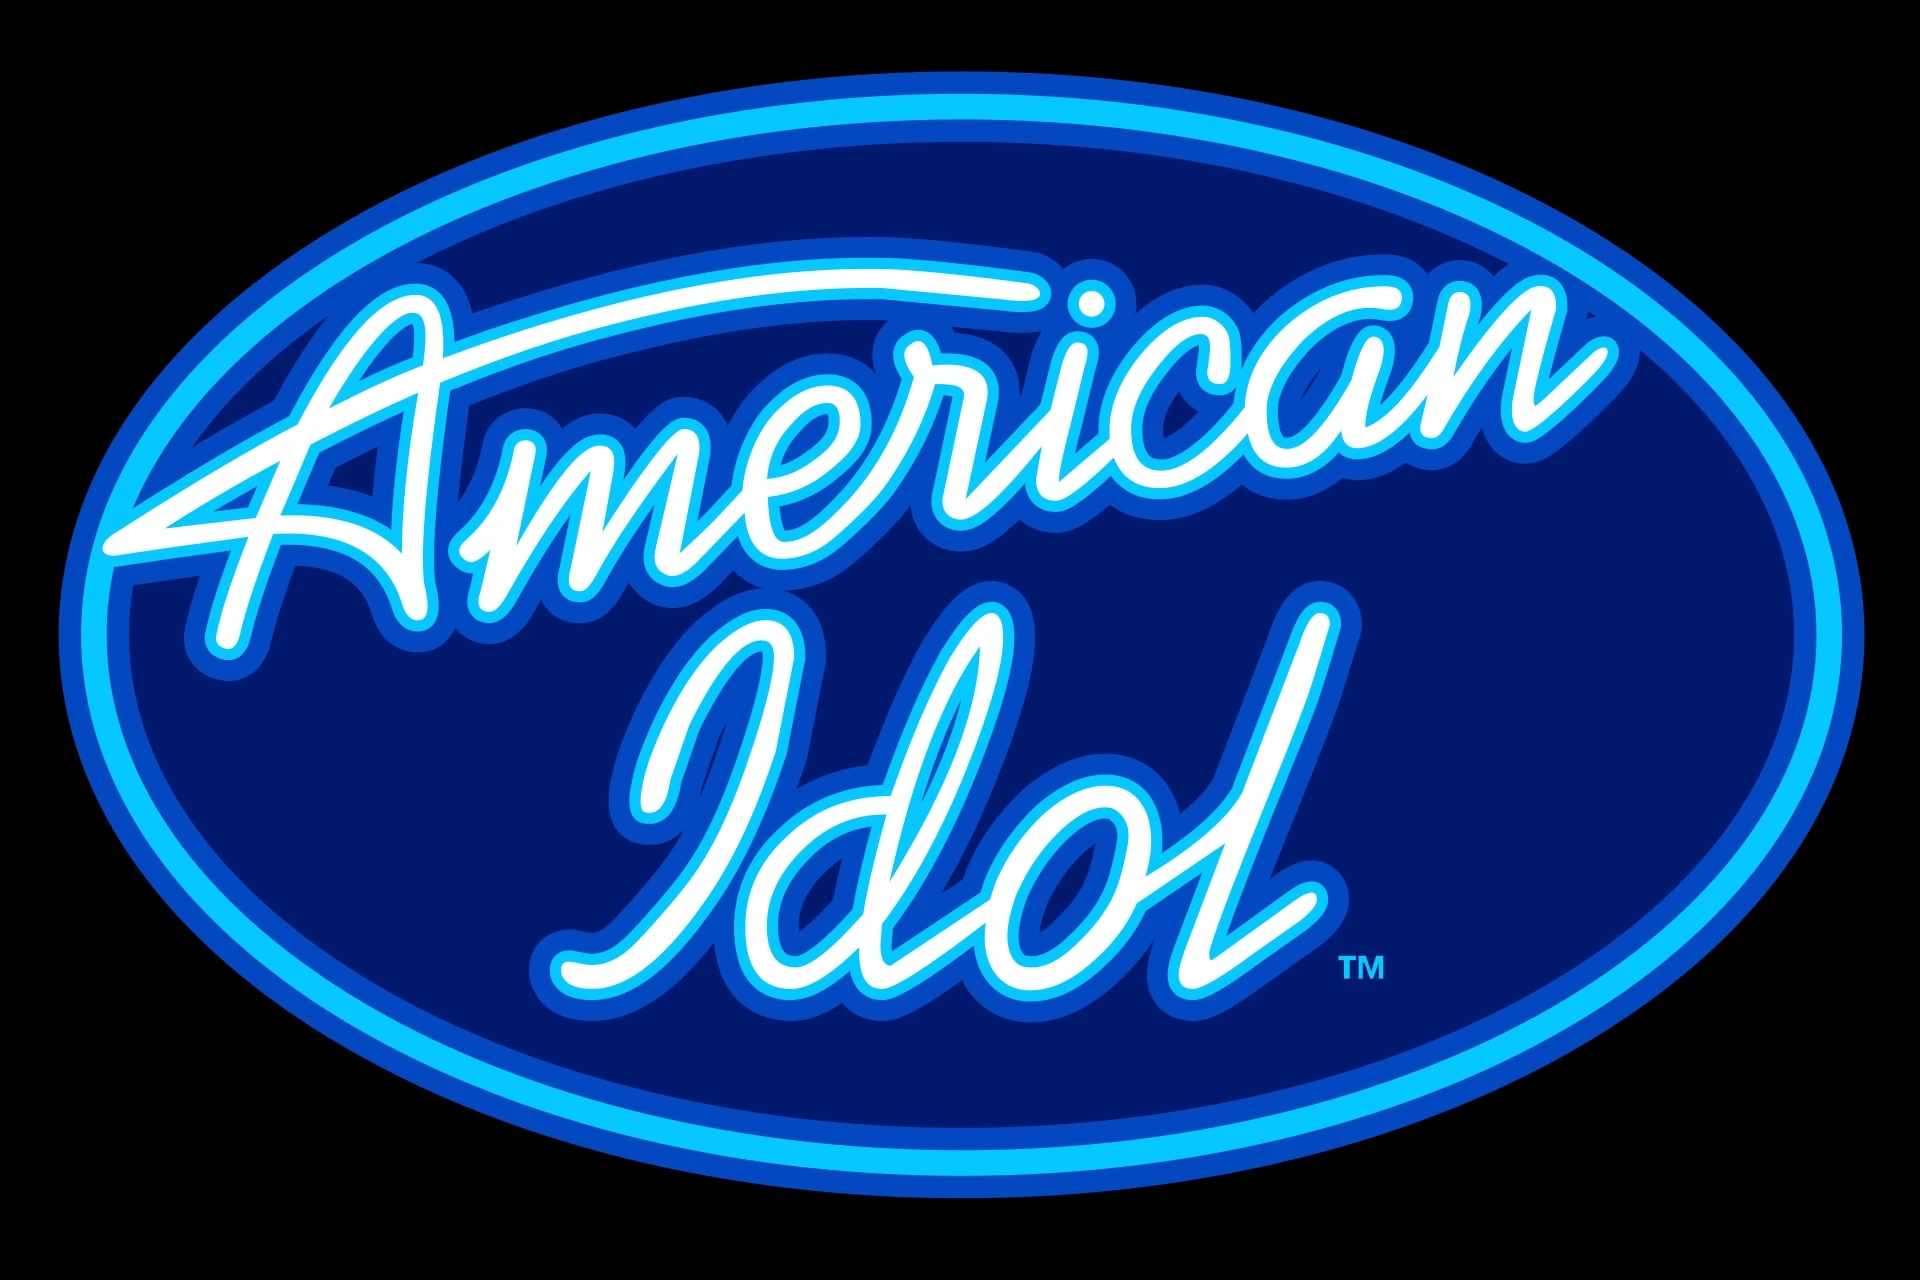 "American Idol" Is the No. 1 Entertainment Program of the Night in Adults 18-49